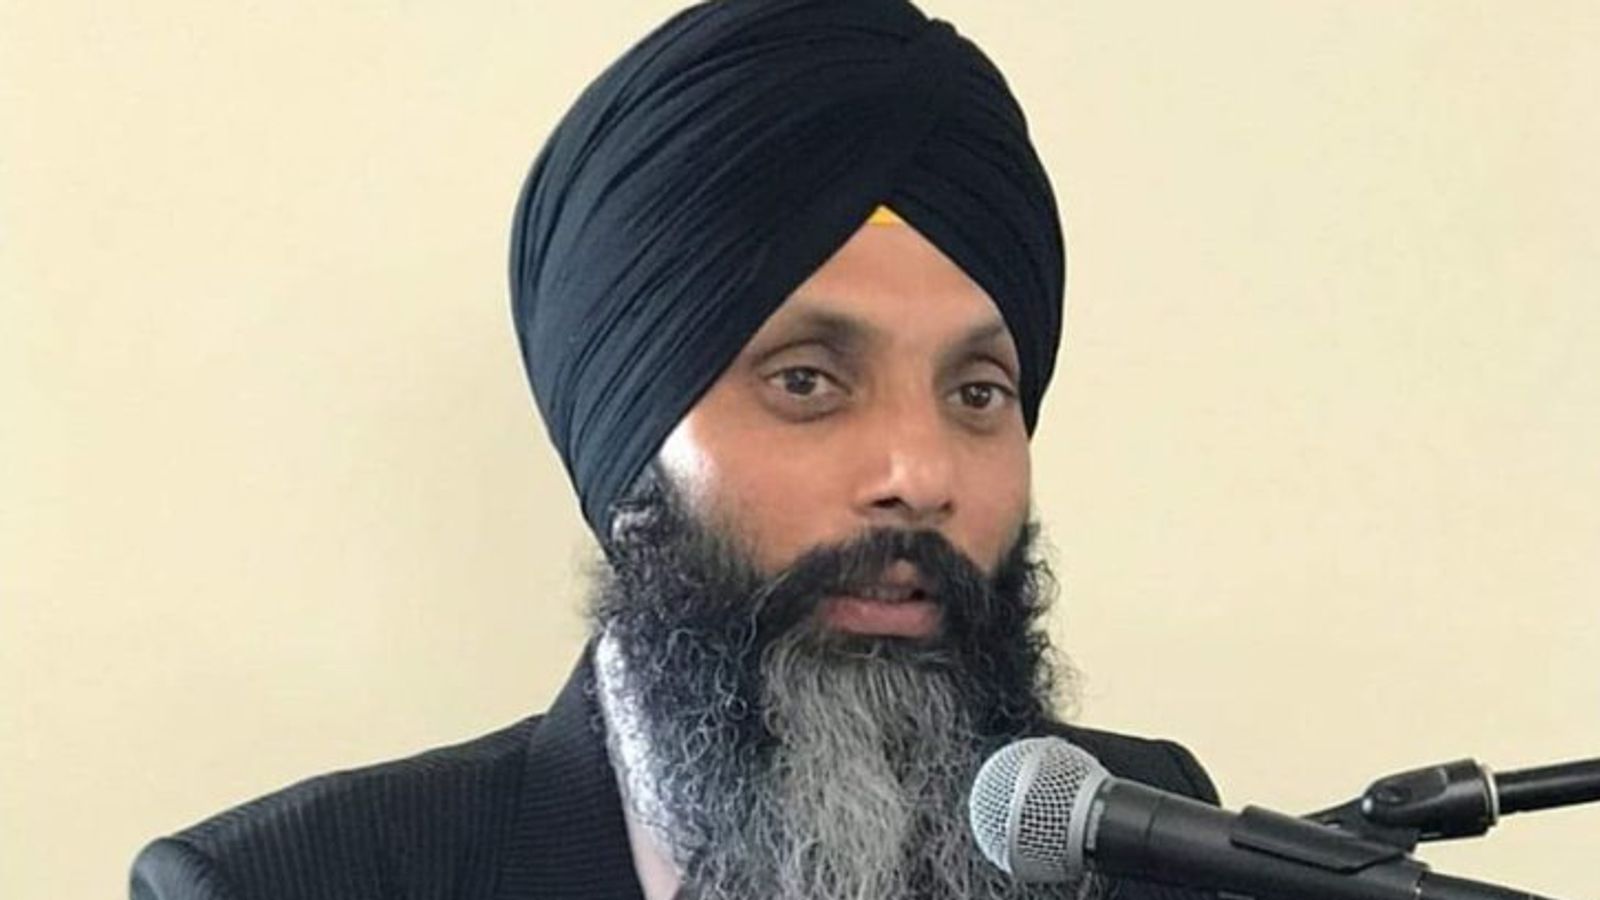 Three charged over killing of Sikh separatist leader in Canada - in incident which sparked diplomatic spat with India